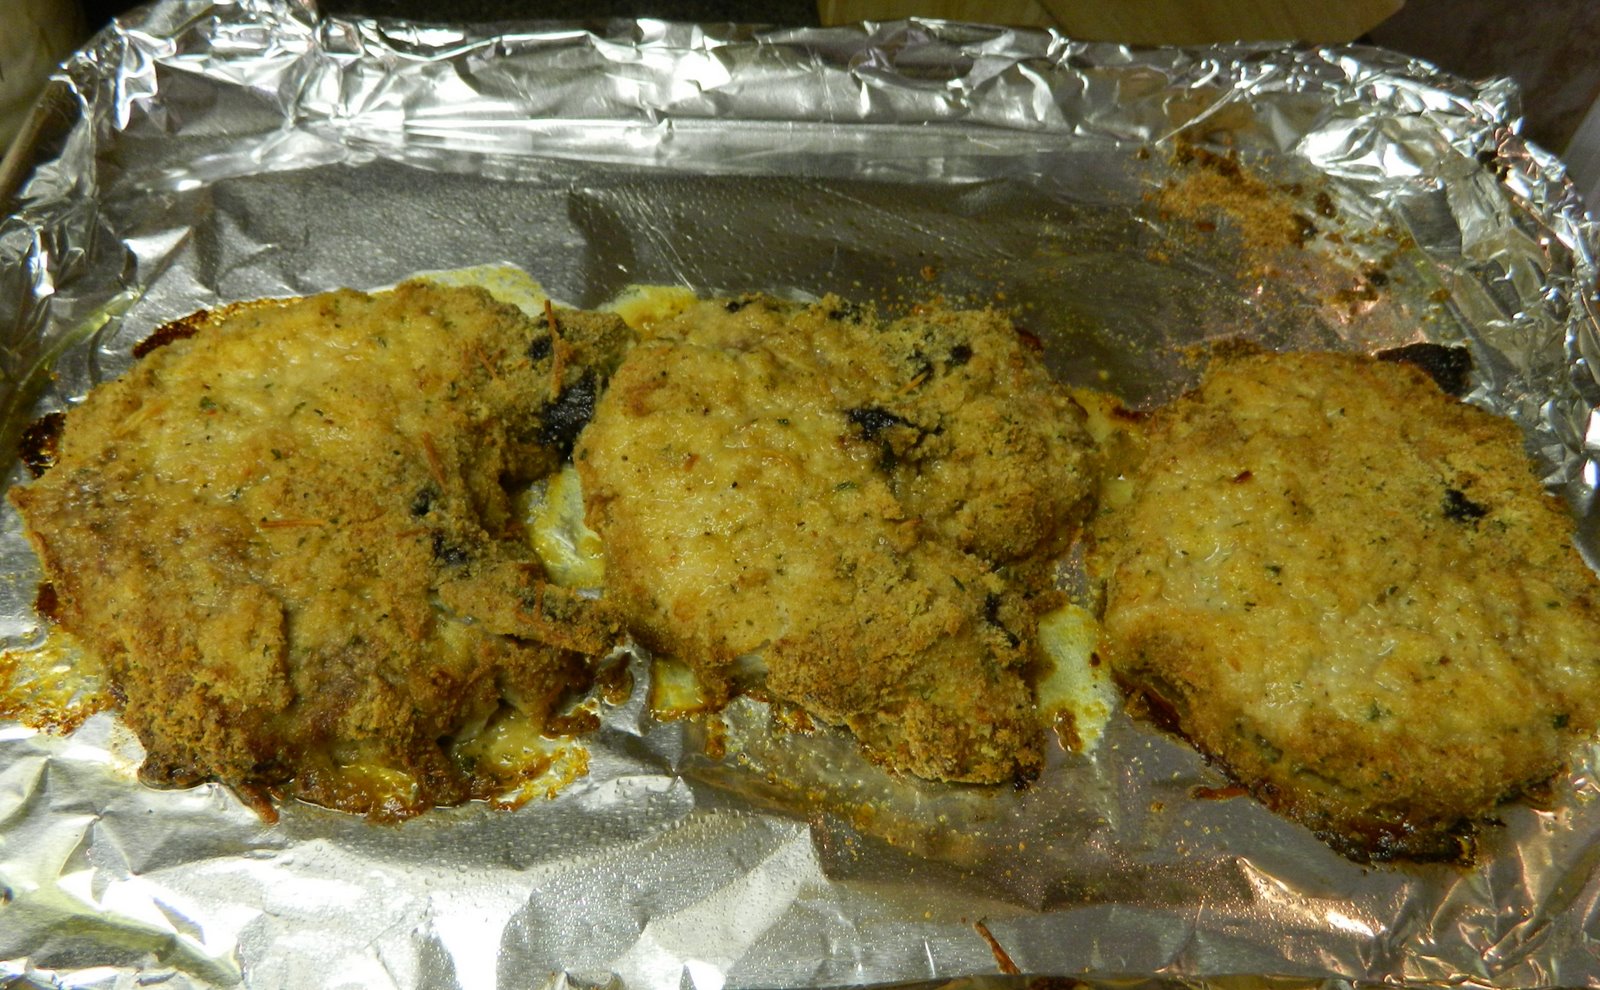 Oven Fried Pork Chops Using Bread Crumbs